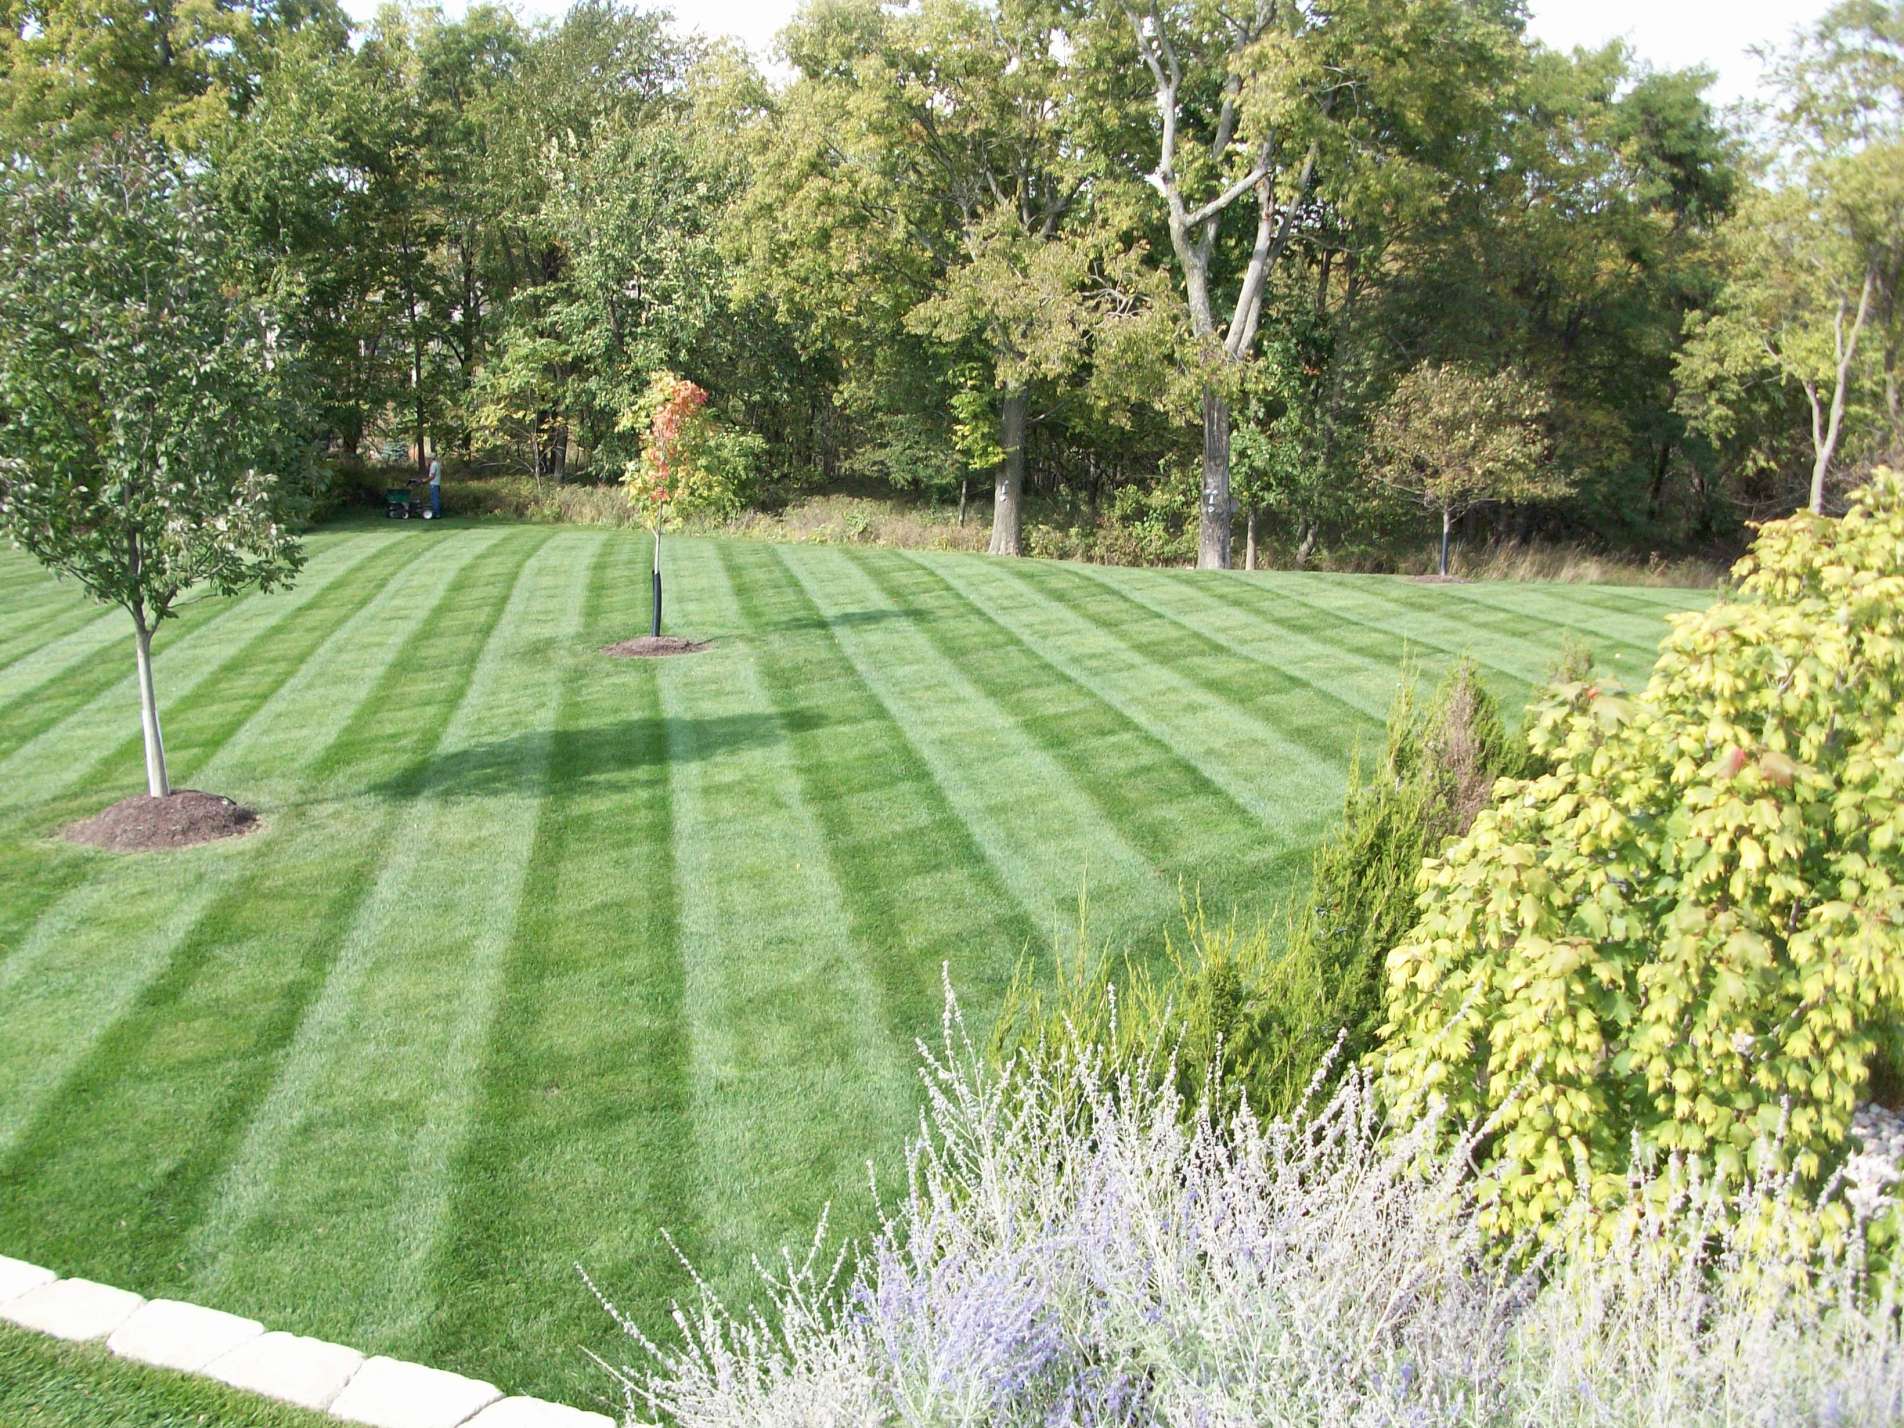 With regular mowing, edging, and trimming the Greenlawn team will keep your lawn in pristine shape.